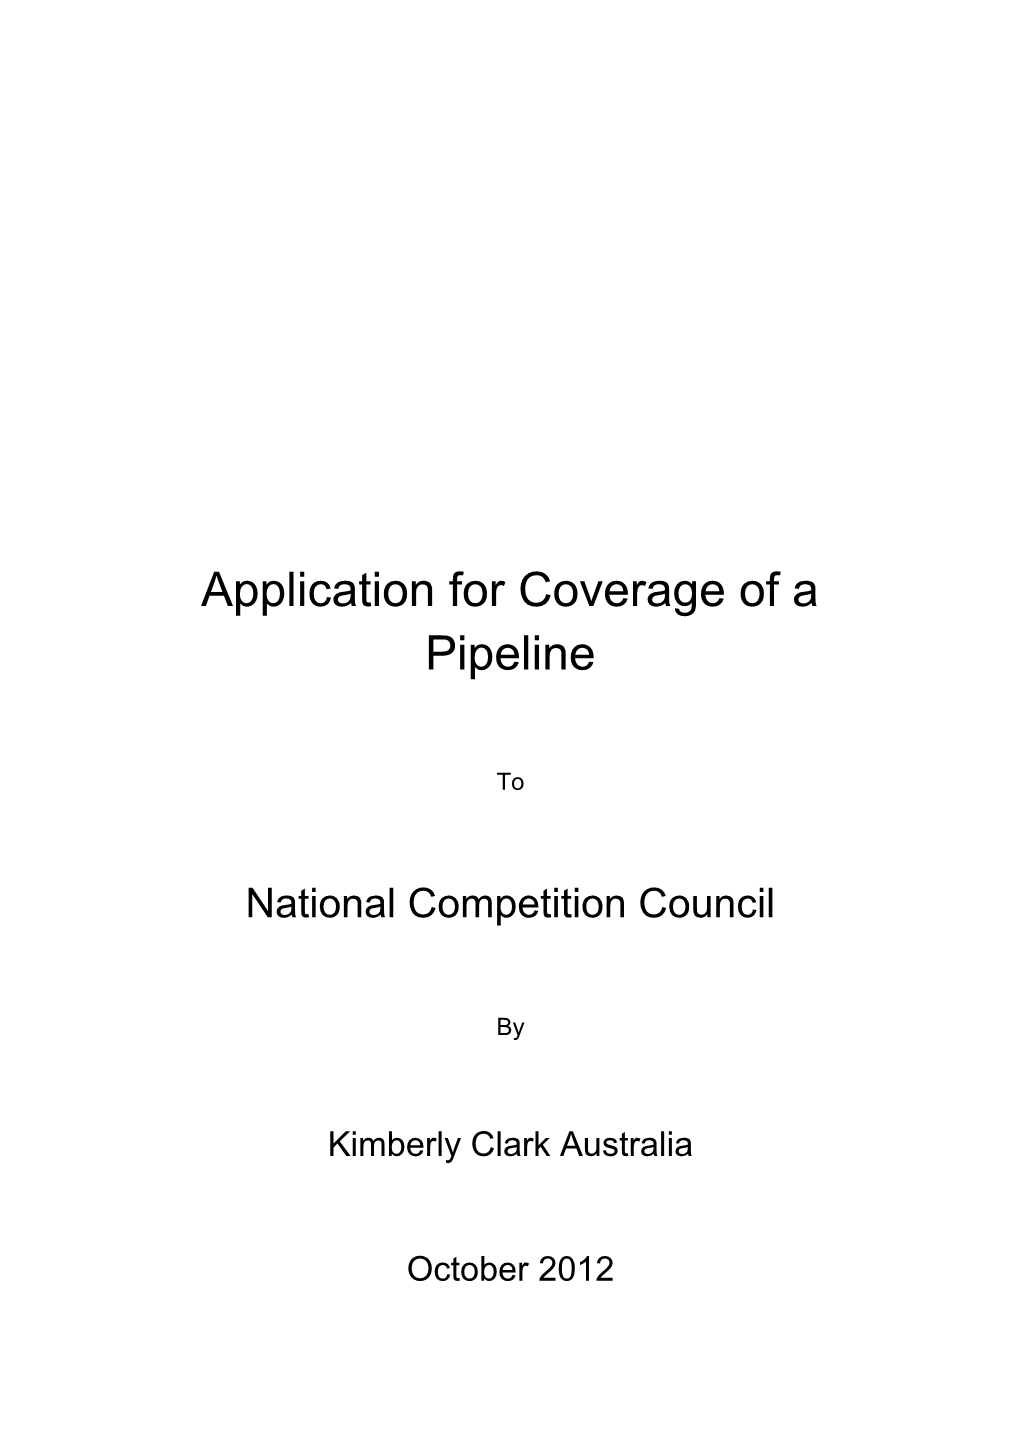 Application for Coverage of the South Eastern Pipeline System Under The